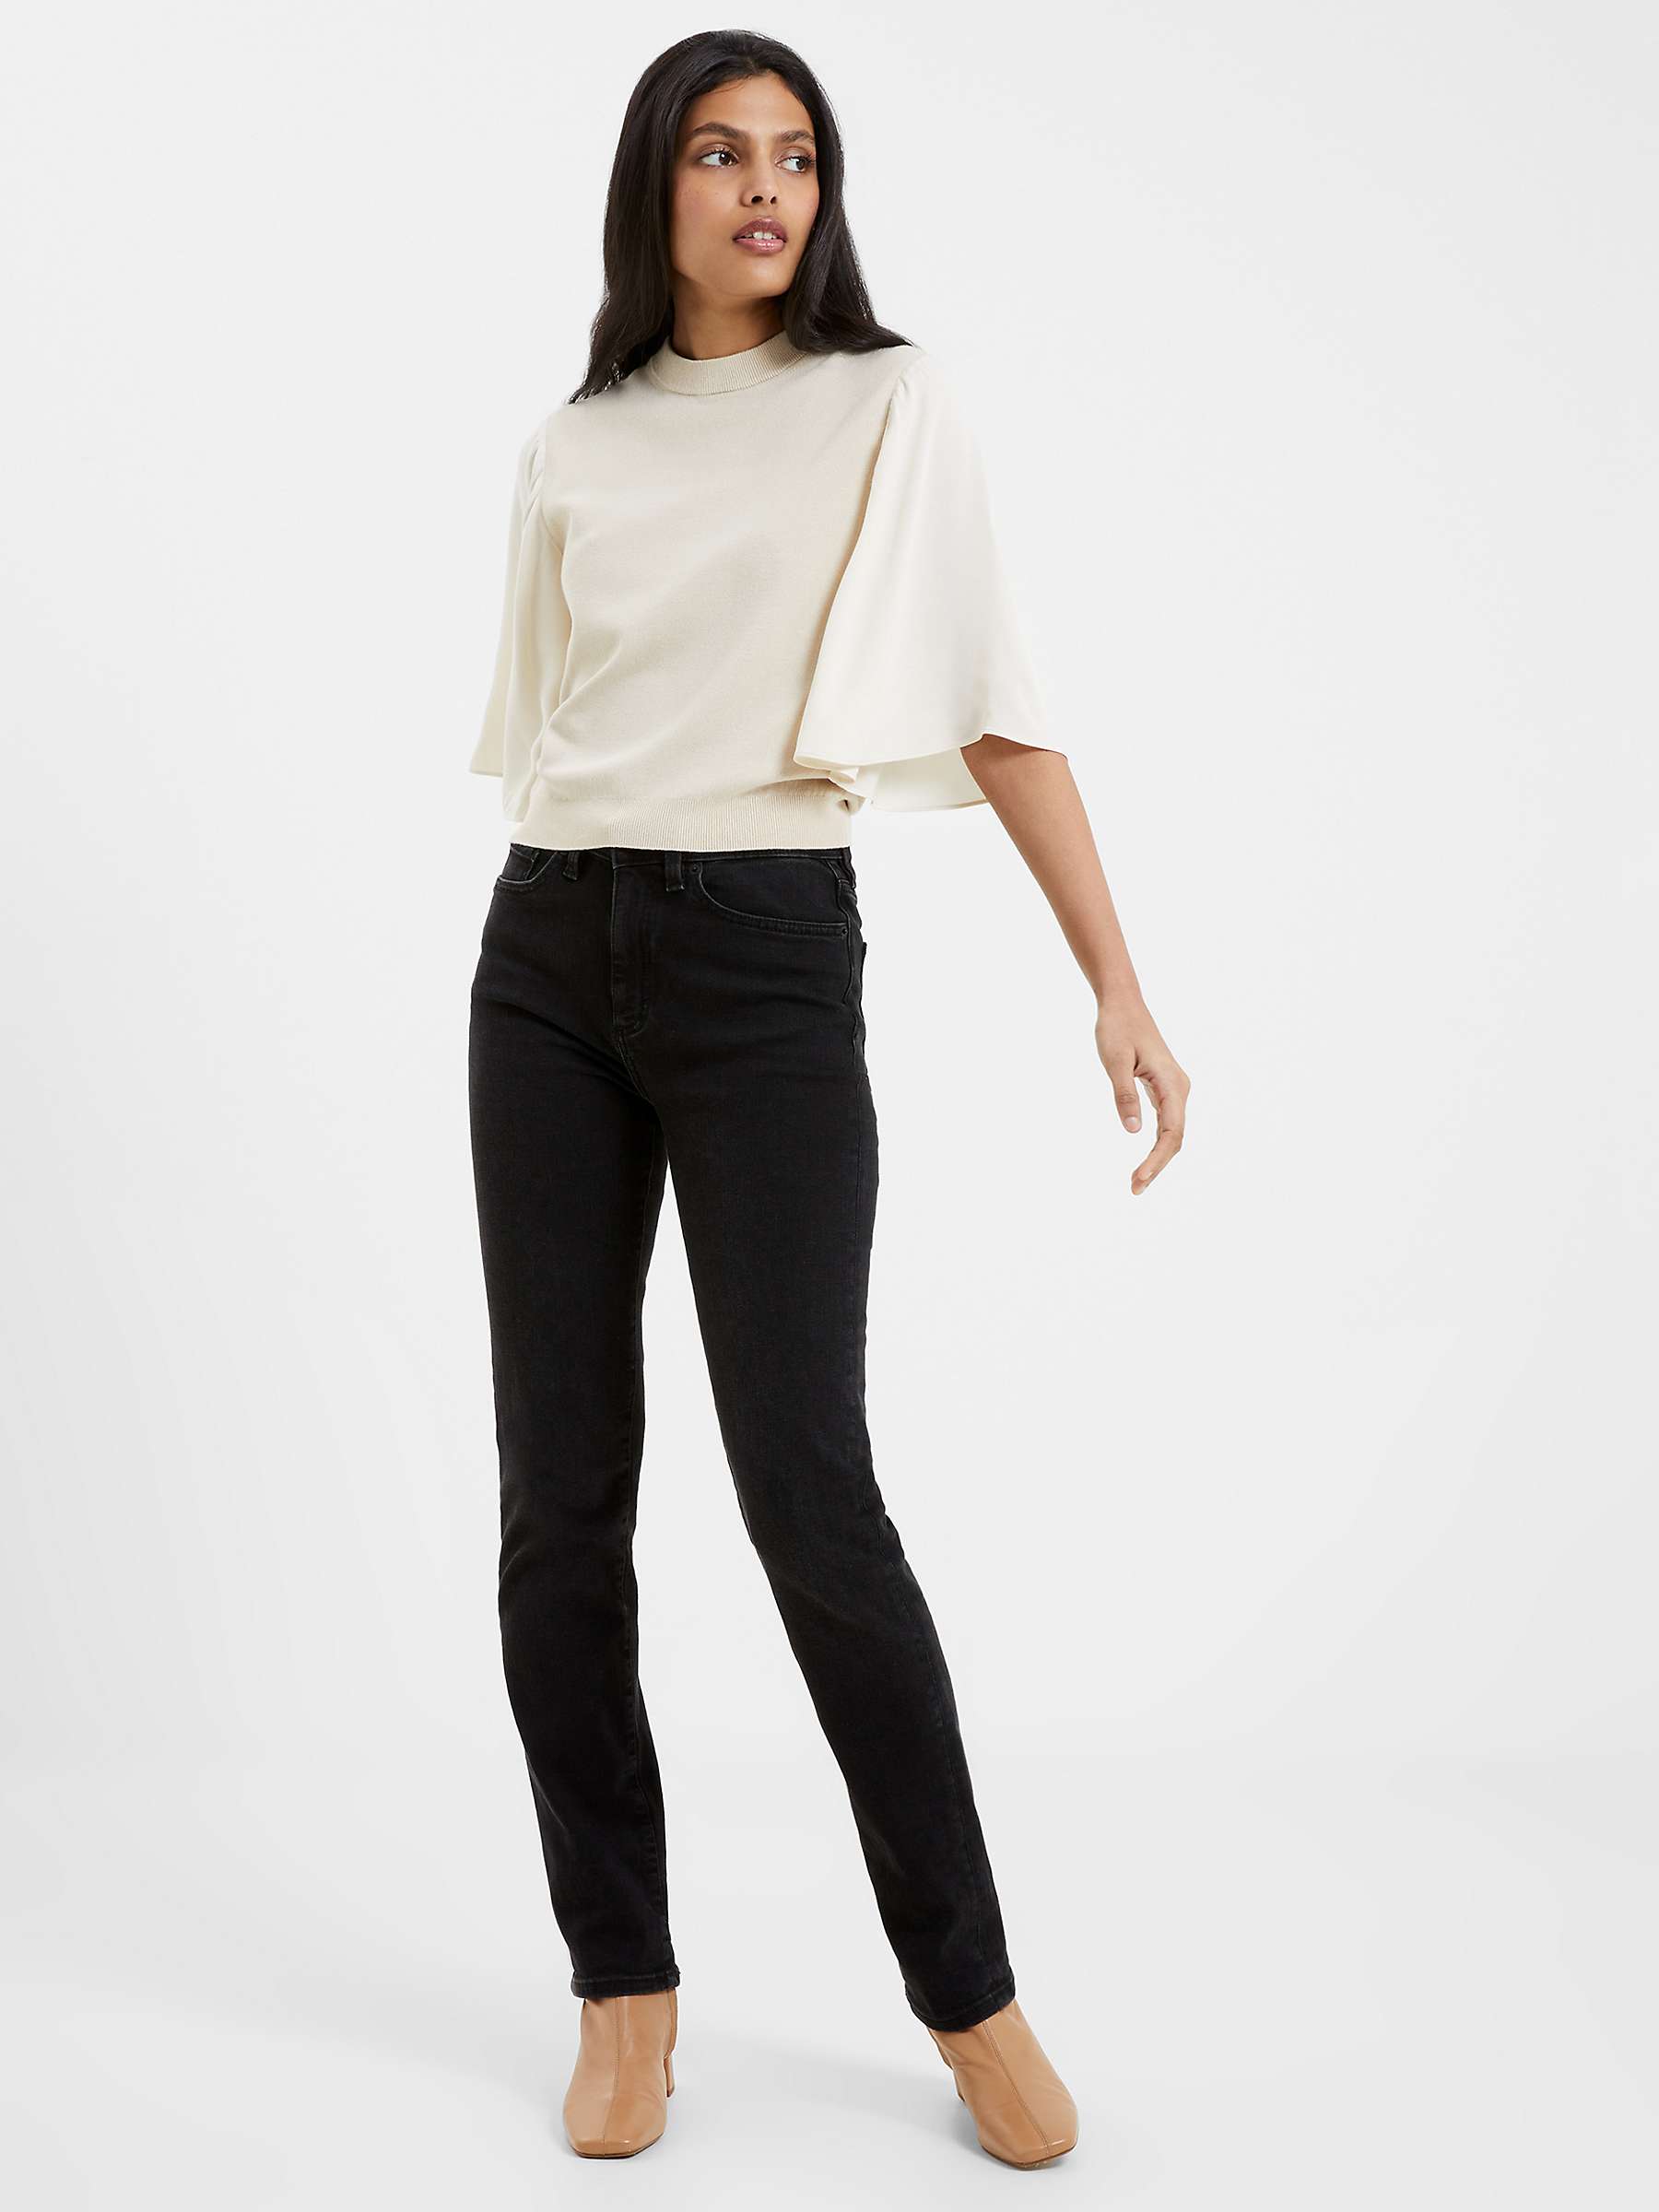 Buy French Connection Krista Anglel Sleeve Jumper, Classic Cream Online at johnlewis.com